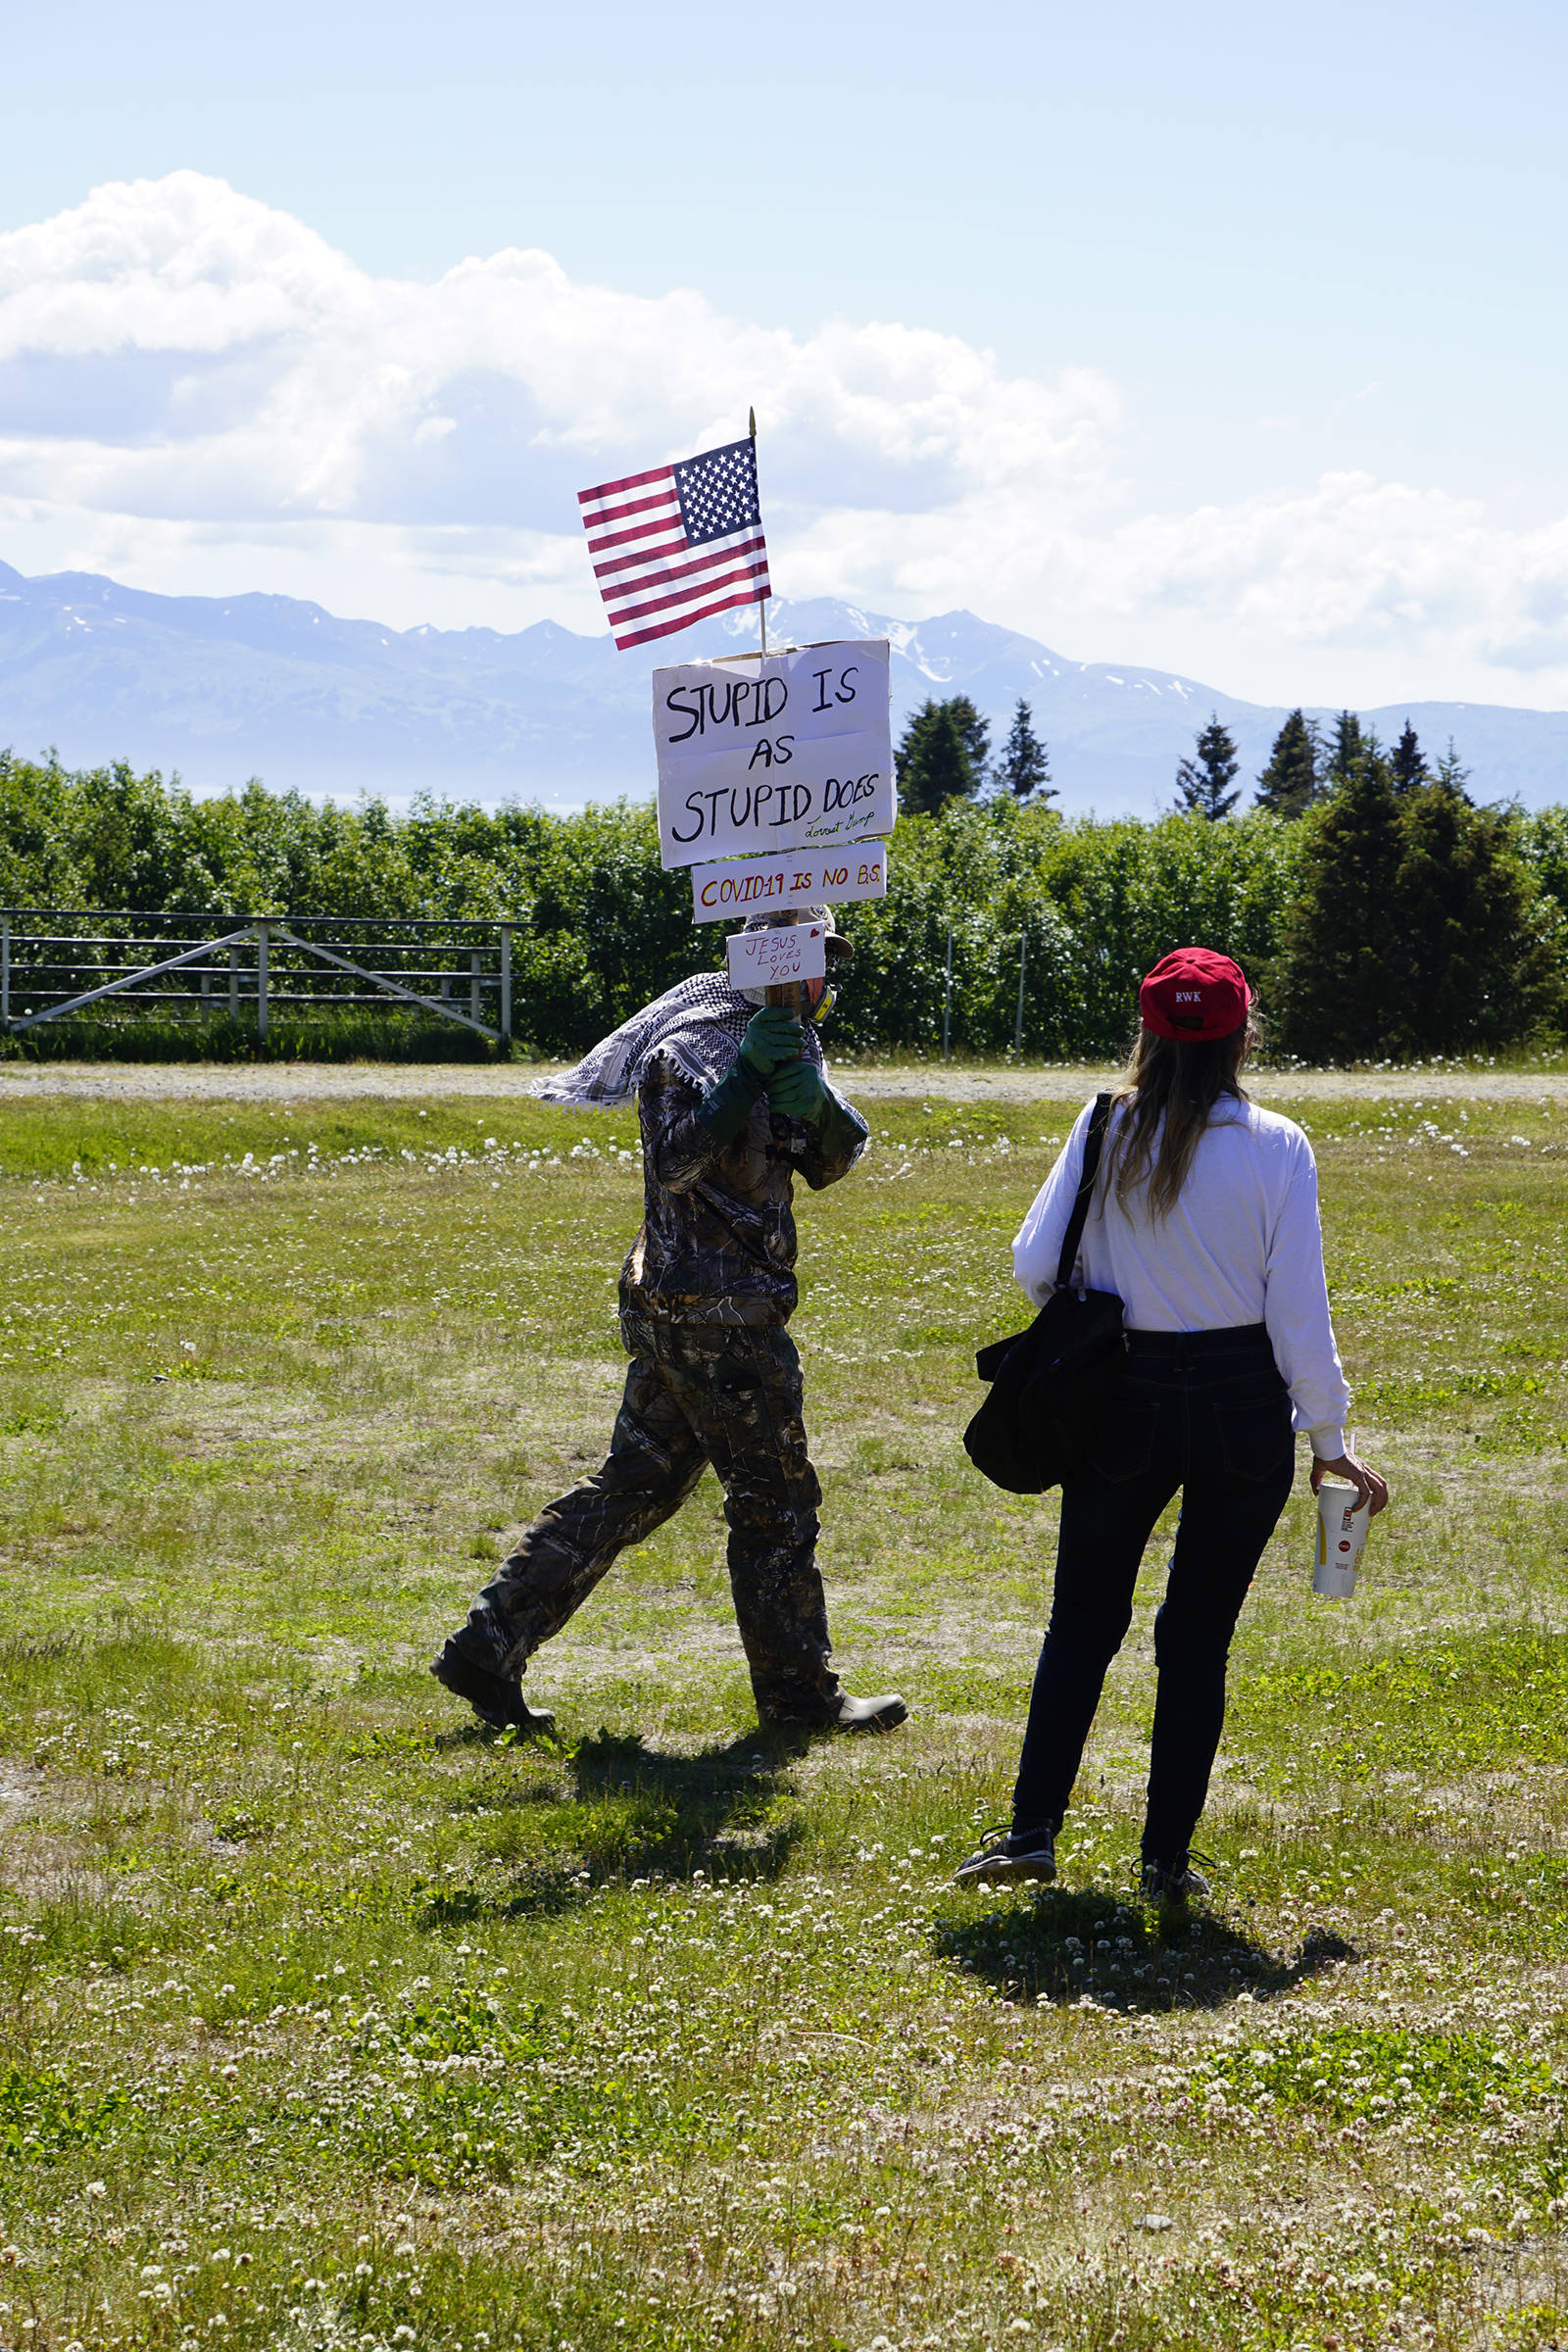 Wearing a respirator, Greg Sutter carries a sign at a campaign rally and ice cream social for Rep. Sarah Vance, R-Homer, on Sunday, June 14, 2020, at Karen Hornaday Park in Homer, Alaska. The sign reads “Stupid is as stupid does - Forrest Gump; COVID-19 is no B.S., and Jesus loves you.” Sutter was the lone protester at Vance’s event. (Photo by Michael Armstrong/Homer News)